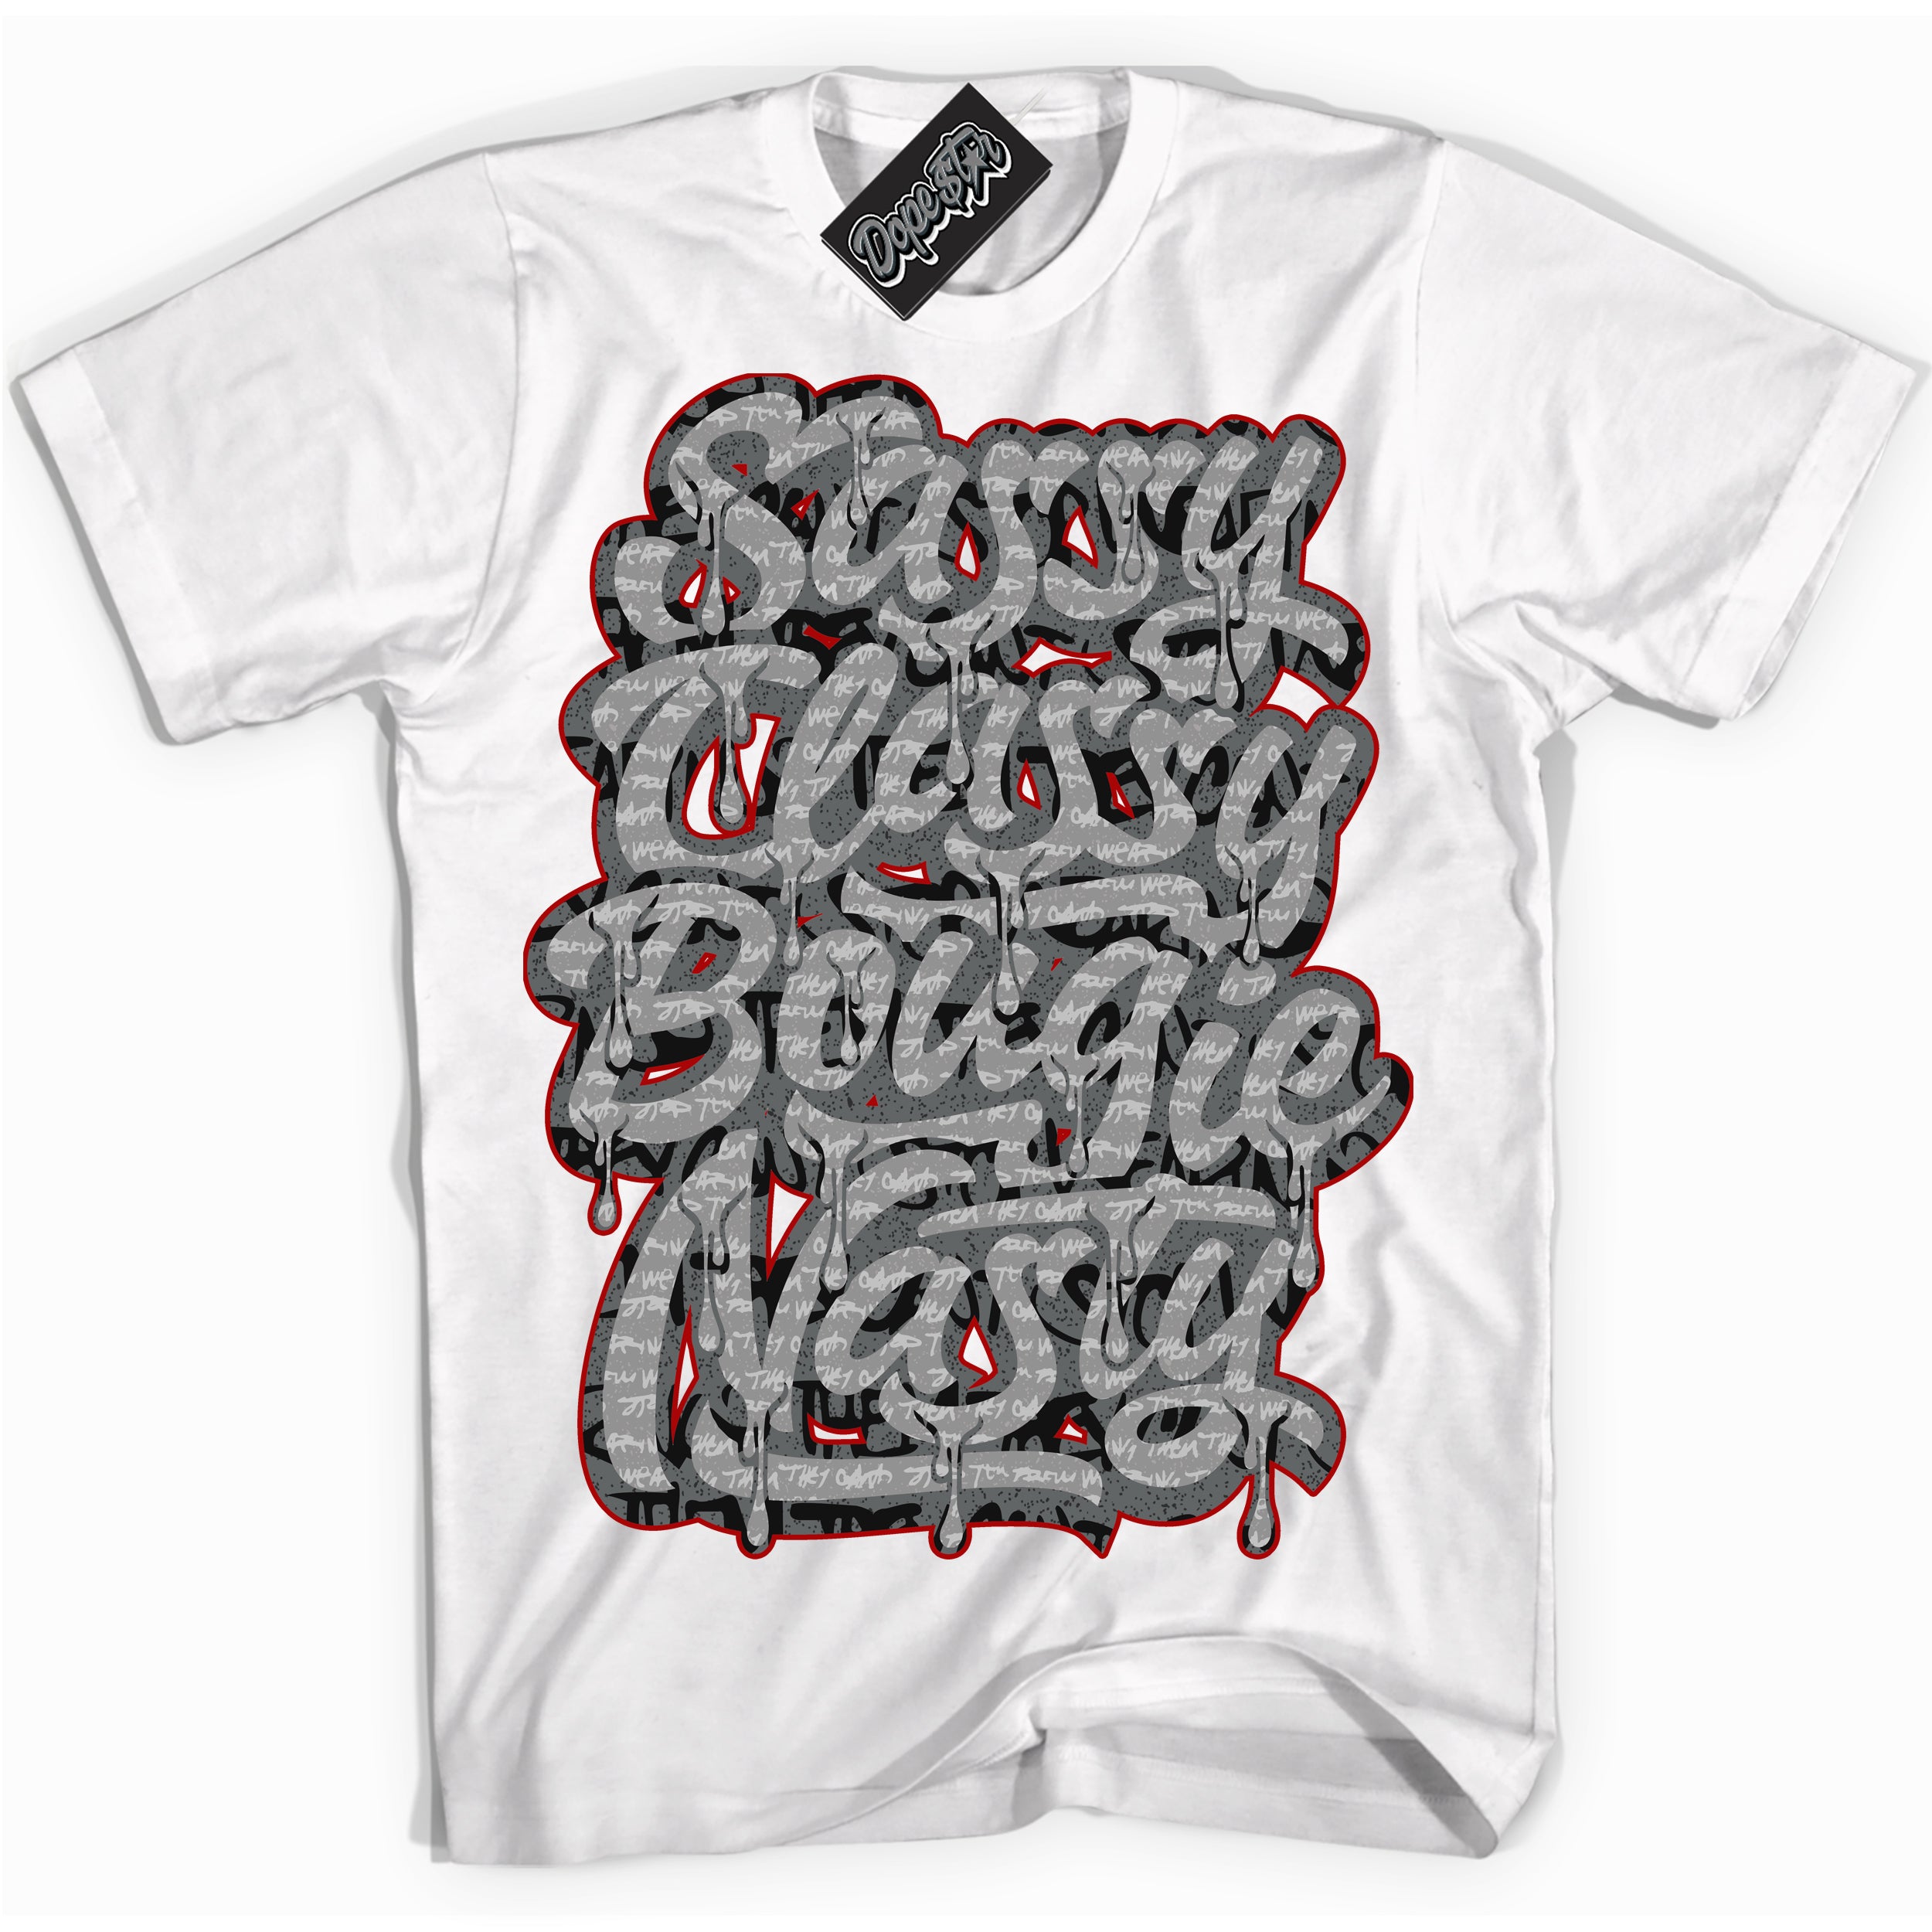 Cool White Shirt with “ Sassy Classy ” design that perfectly matches Rebellionaire 1s Sneakers.